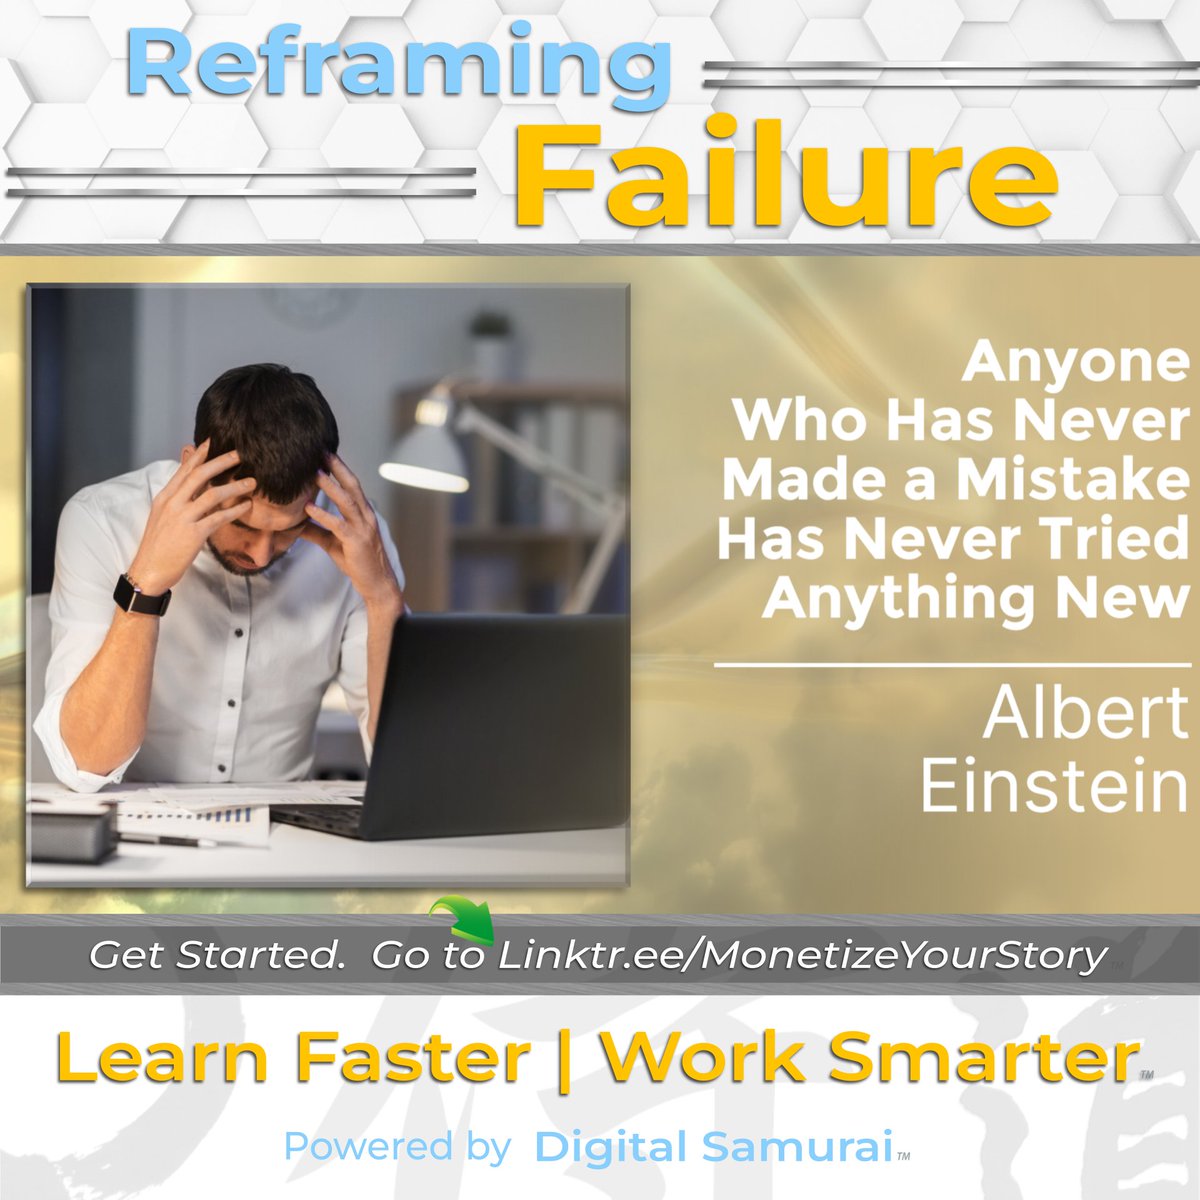 Entrepreneurship views mistakes as essential learning opportunities, fostering a culture of risk-taking and adaptation,

#MonetizeYourStory #MartinRRicketts #MichelleRicketts
#AlbertEinstein #EntrepreneurMindset